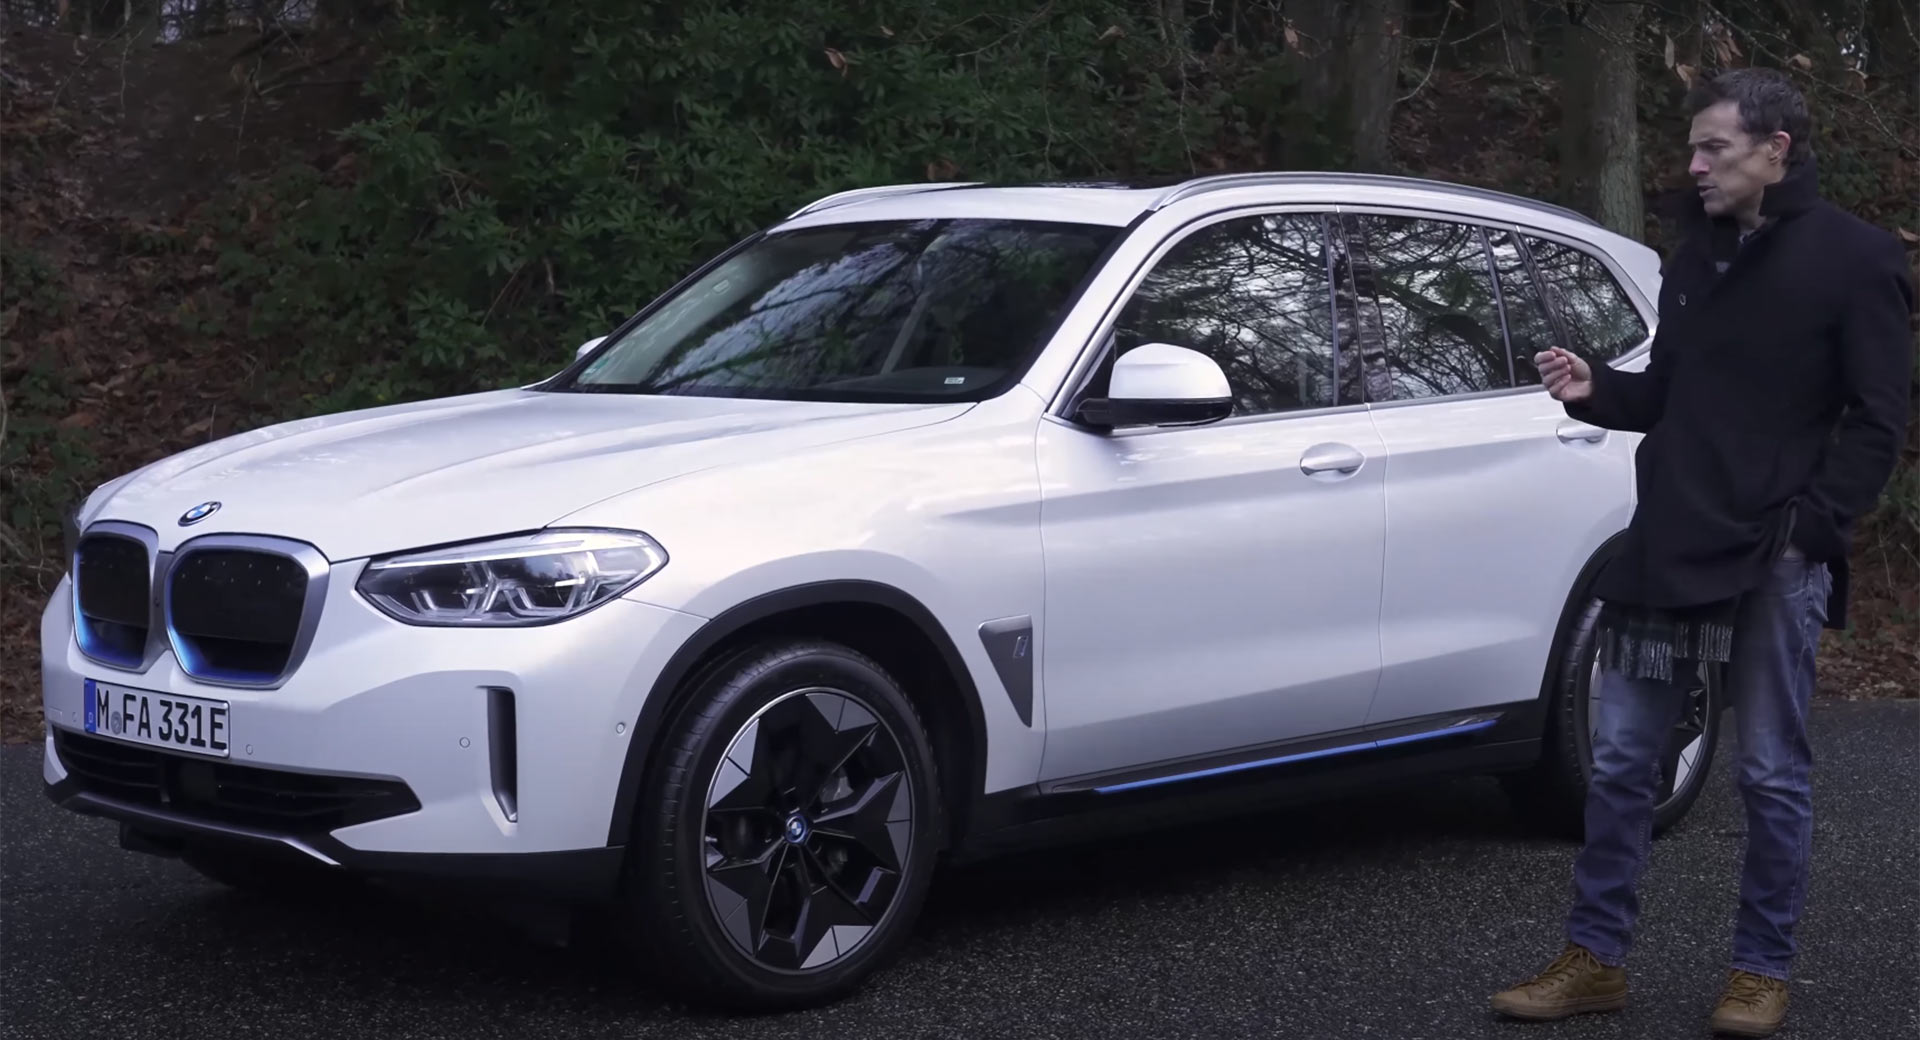 Can The All-Electrical BMW iX3 Outperform Rivals Like The Audi e-tron And Mercedes EQC? Auto Recent